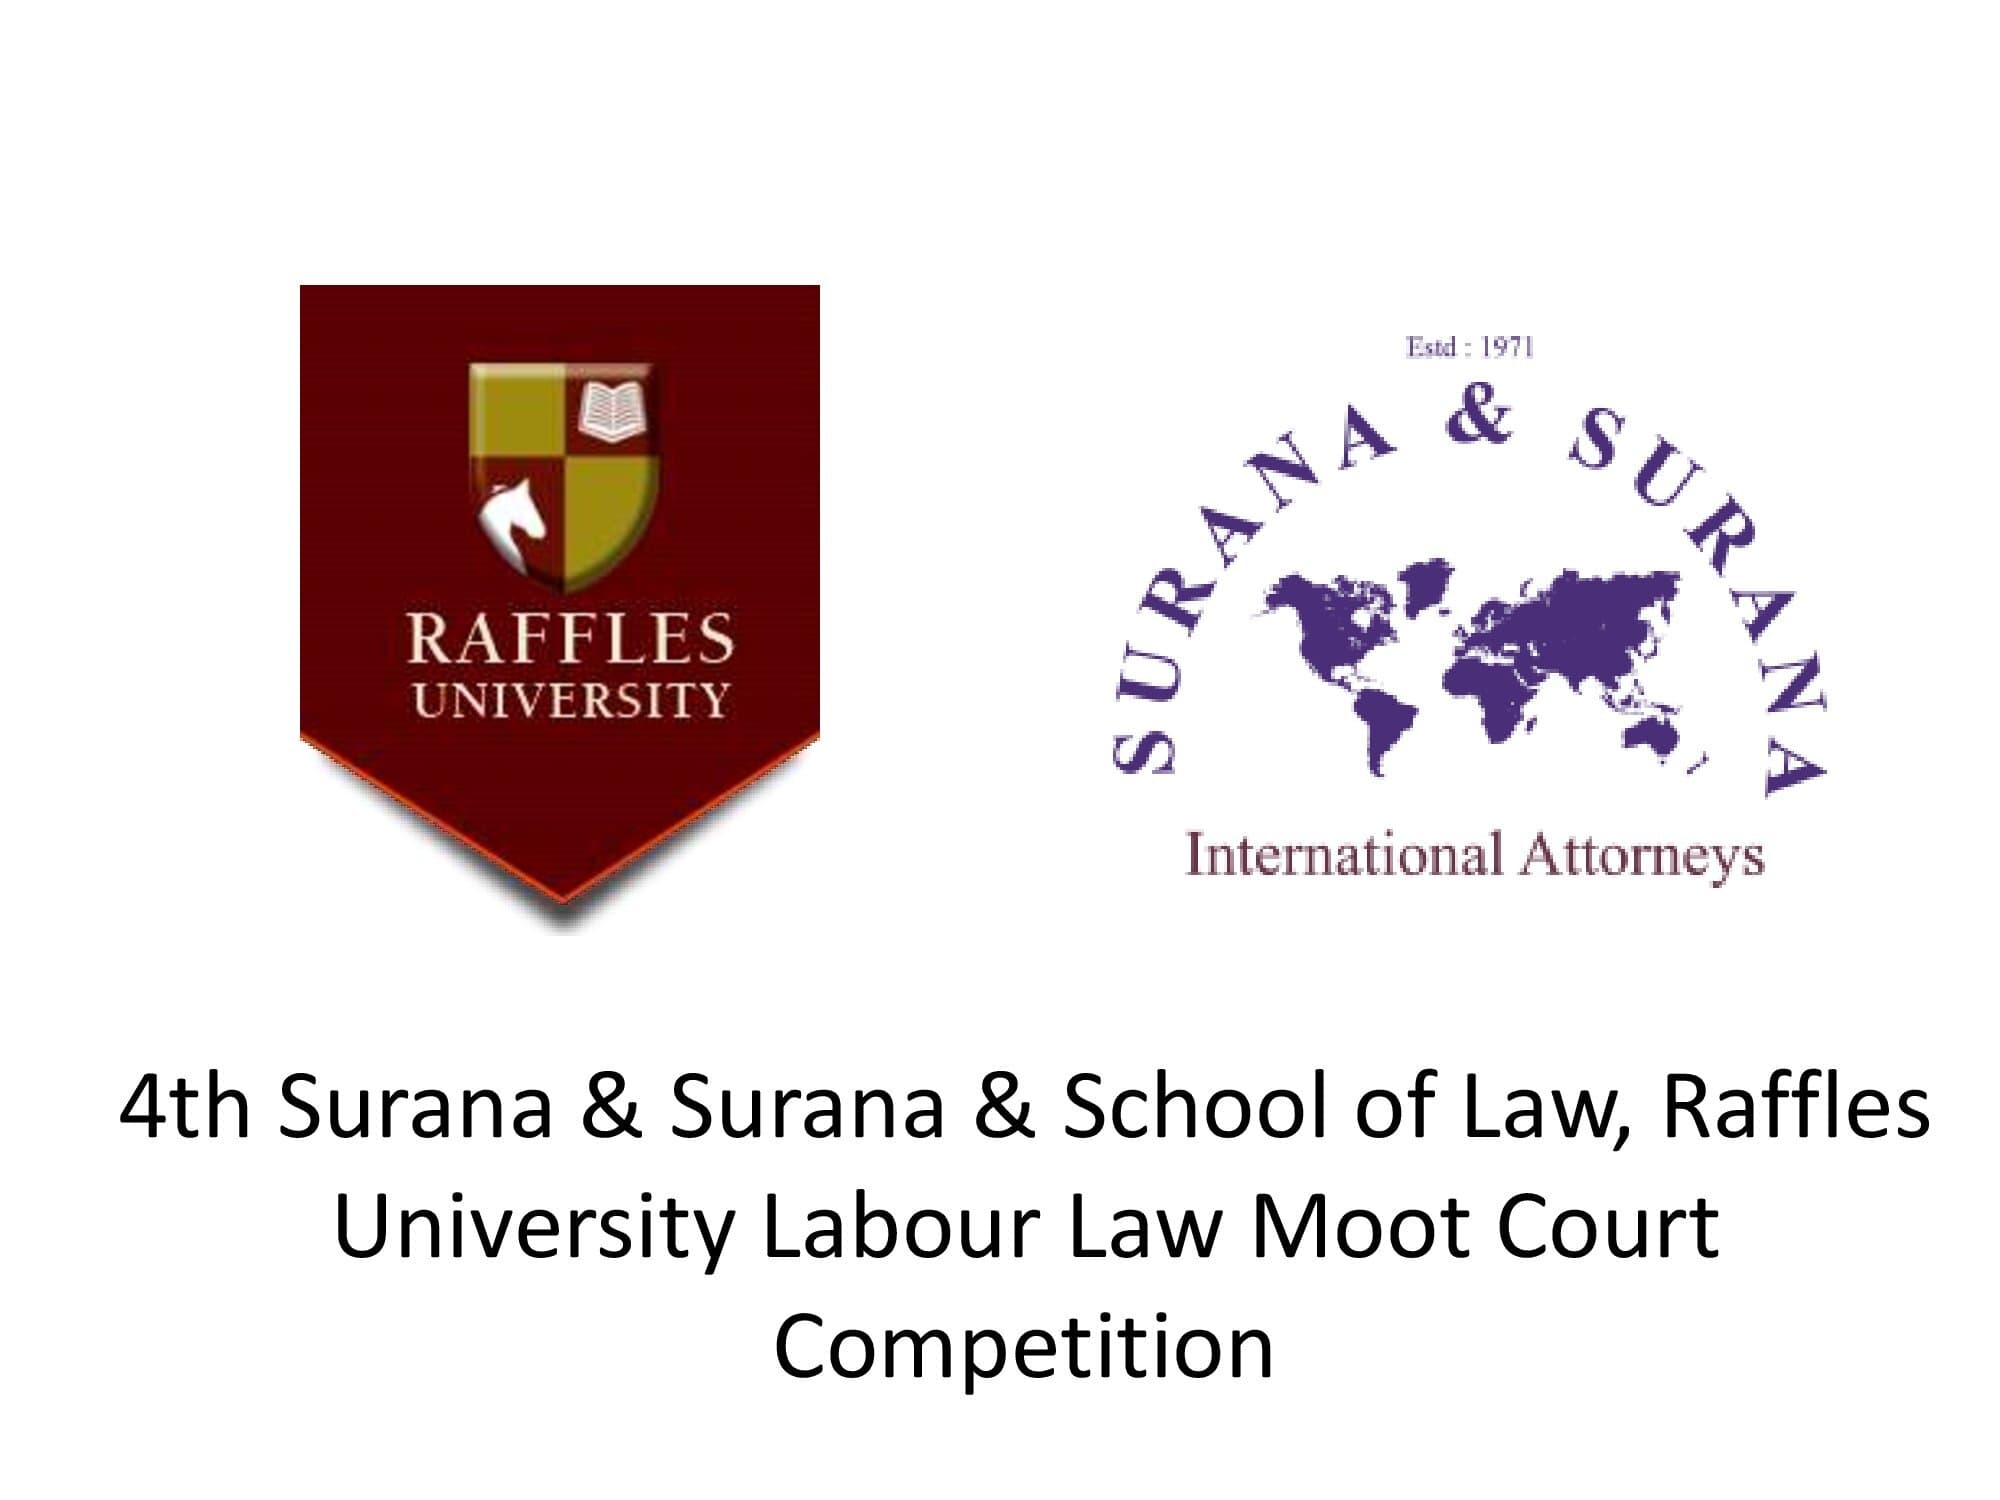 4th Surana & Surana & School of Law, Raffles University National Labour Law Moot Court Competition